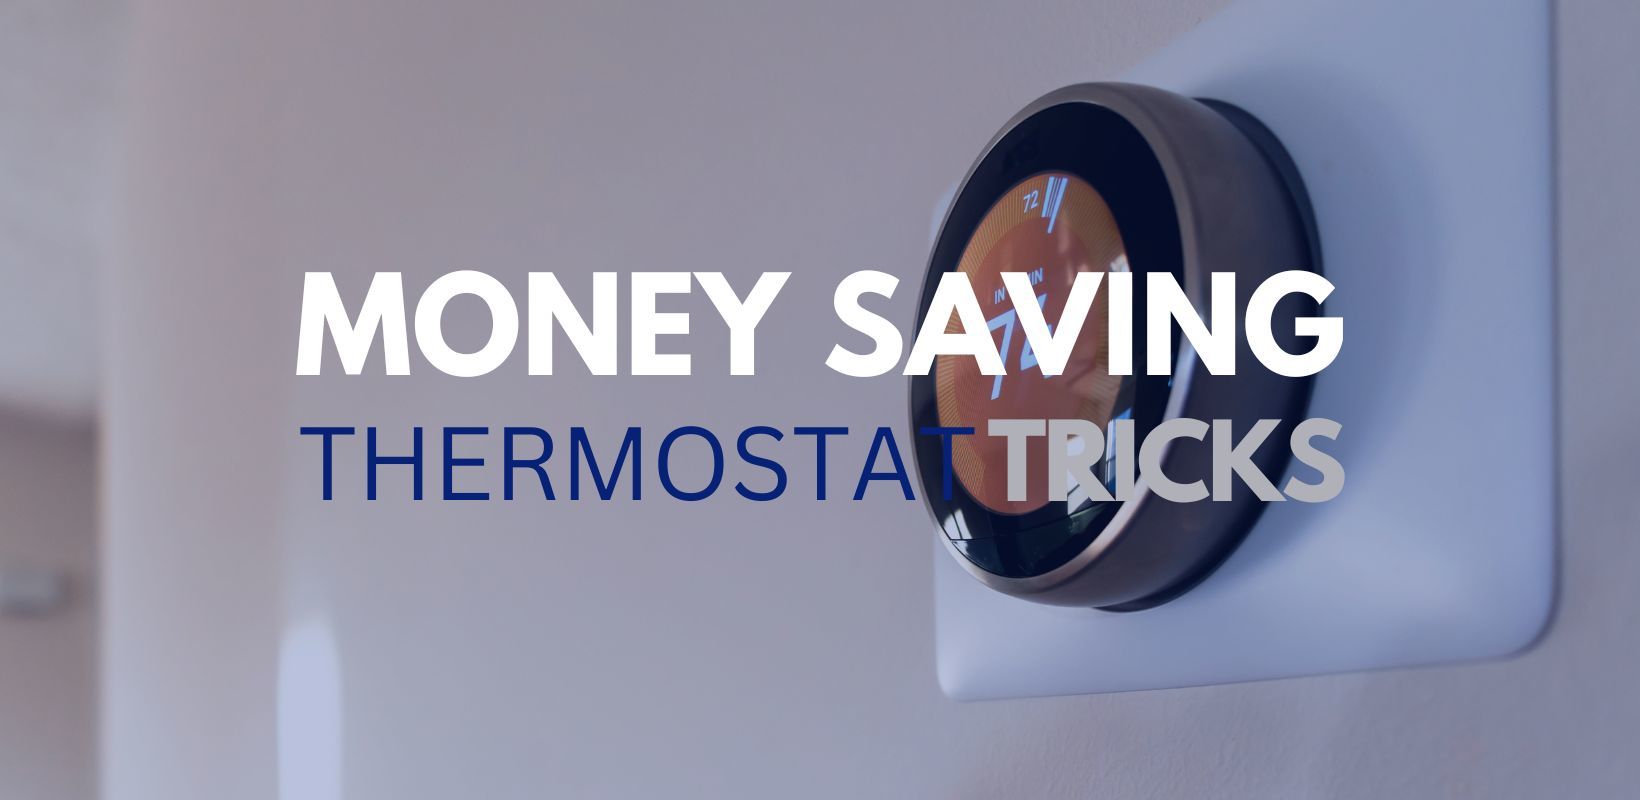 Money Saving Thermostat Tricks: Find out the best temperature to heat your home and how your thermostat can save you money this winter.